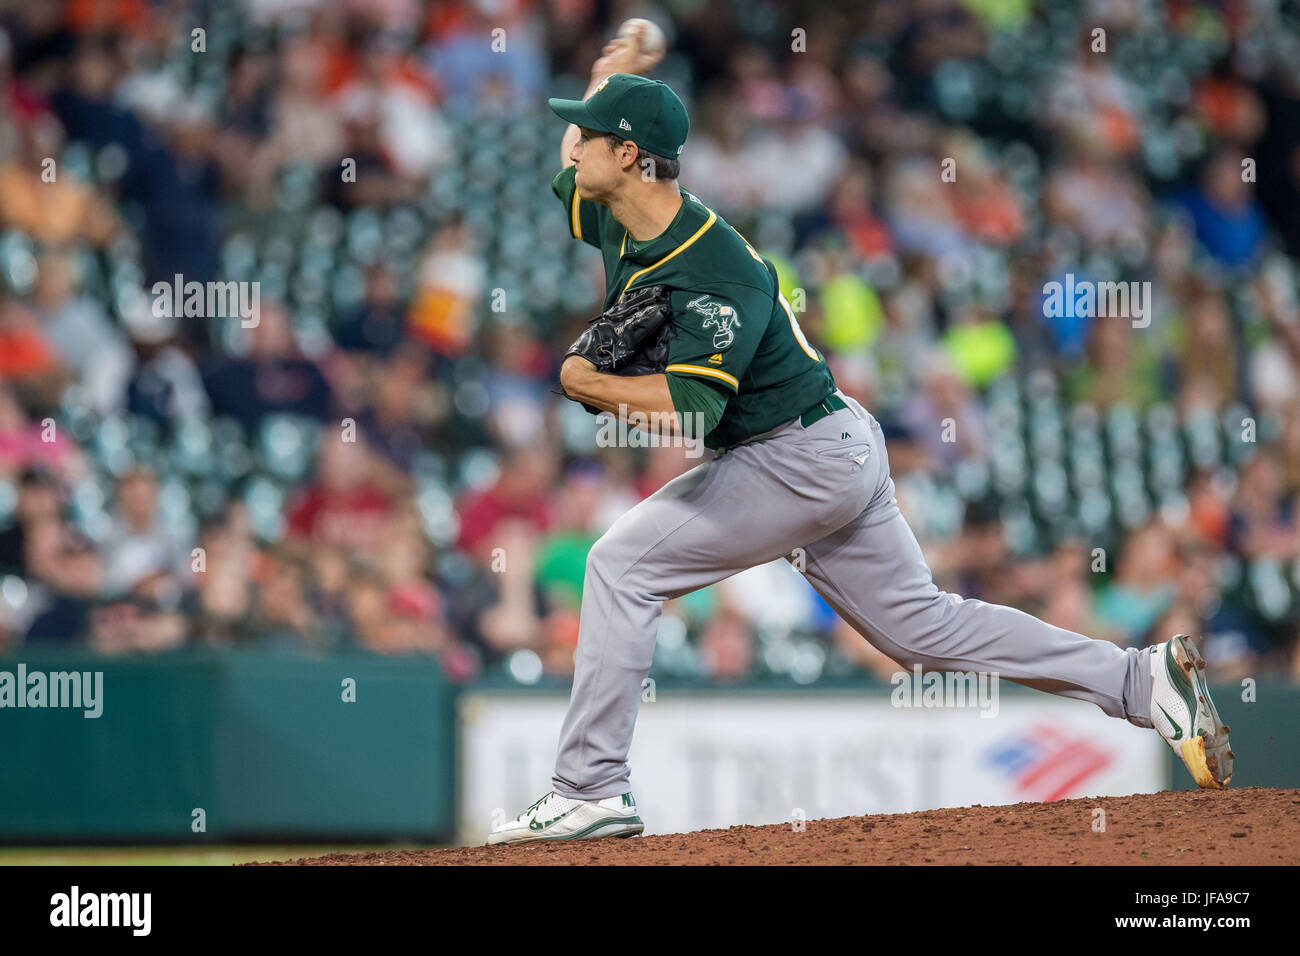 Houston, TX, USA. 29th June, 2017. Oakland Athletics relief pitcher Michael Brady (64) pitches during a Major League Baseball game between the Houston Astros and the Oakland Athletics at Minute Maid Park in Houston, TX. The Astros won the game 6-1.Trask Smith/CSM/Alamy Live News Stock Photo